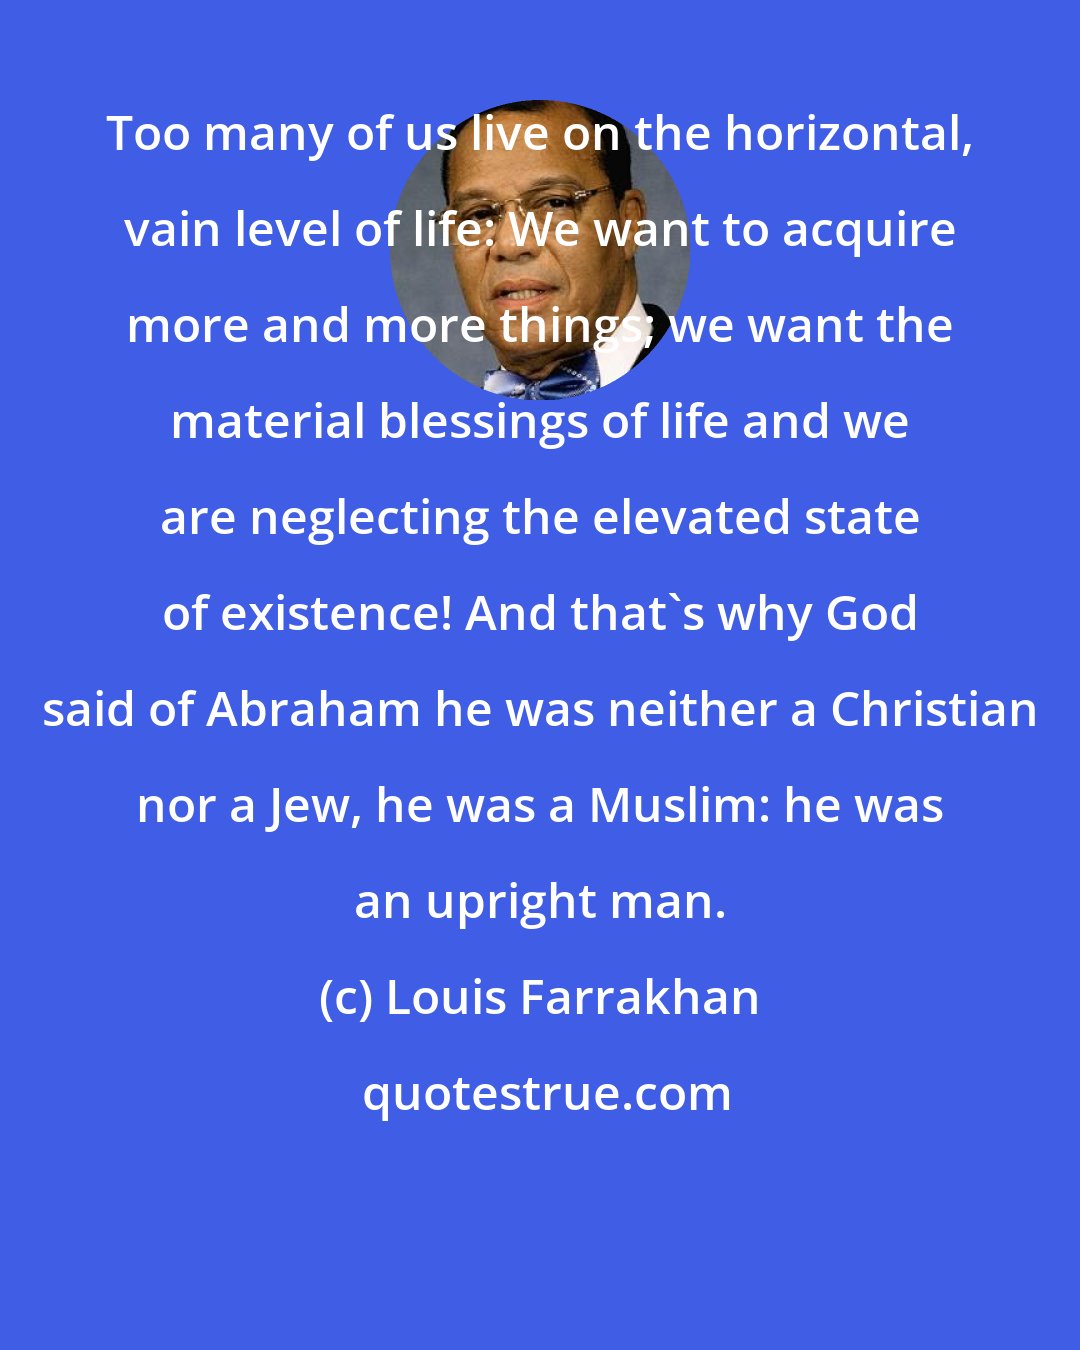 Louis Farrakhan: Too many of us live on the horizontal, vain level of life: We want to acquire more and more things; we want the material blessings of life and we are neglecting the elevated state of existence! And that's why God said of Abraham he was neither a Christian nor a Jew, he was a Muslim: he was an upright man.